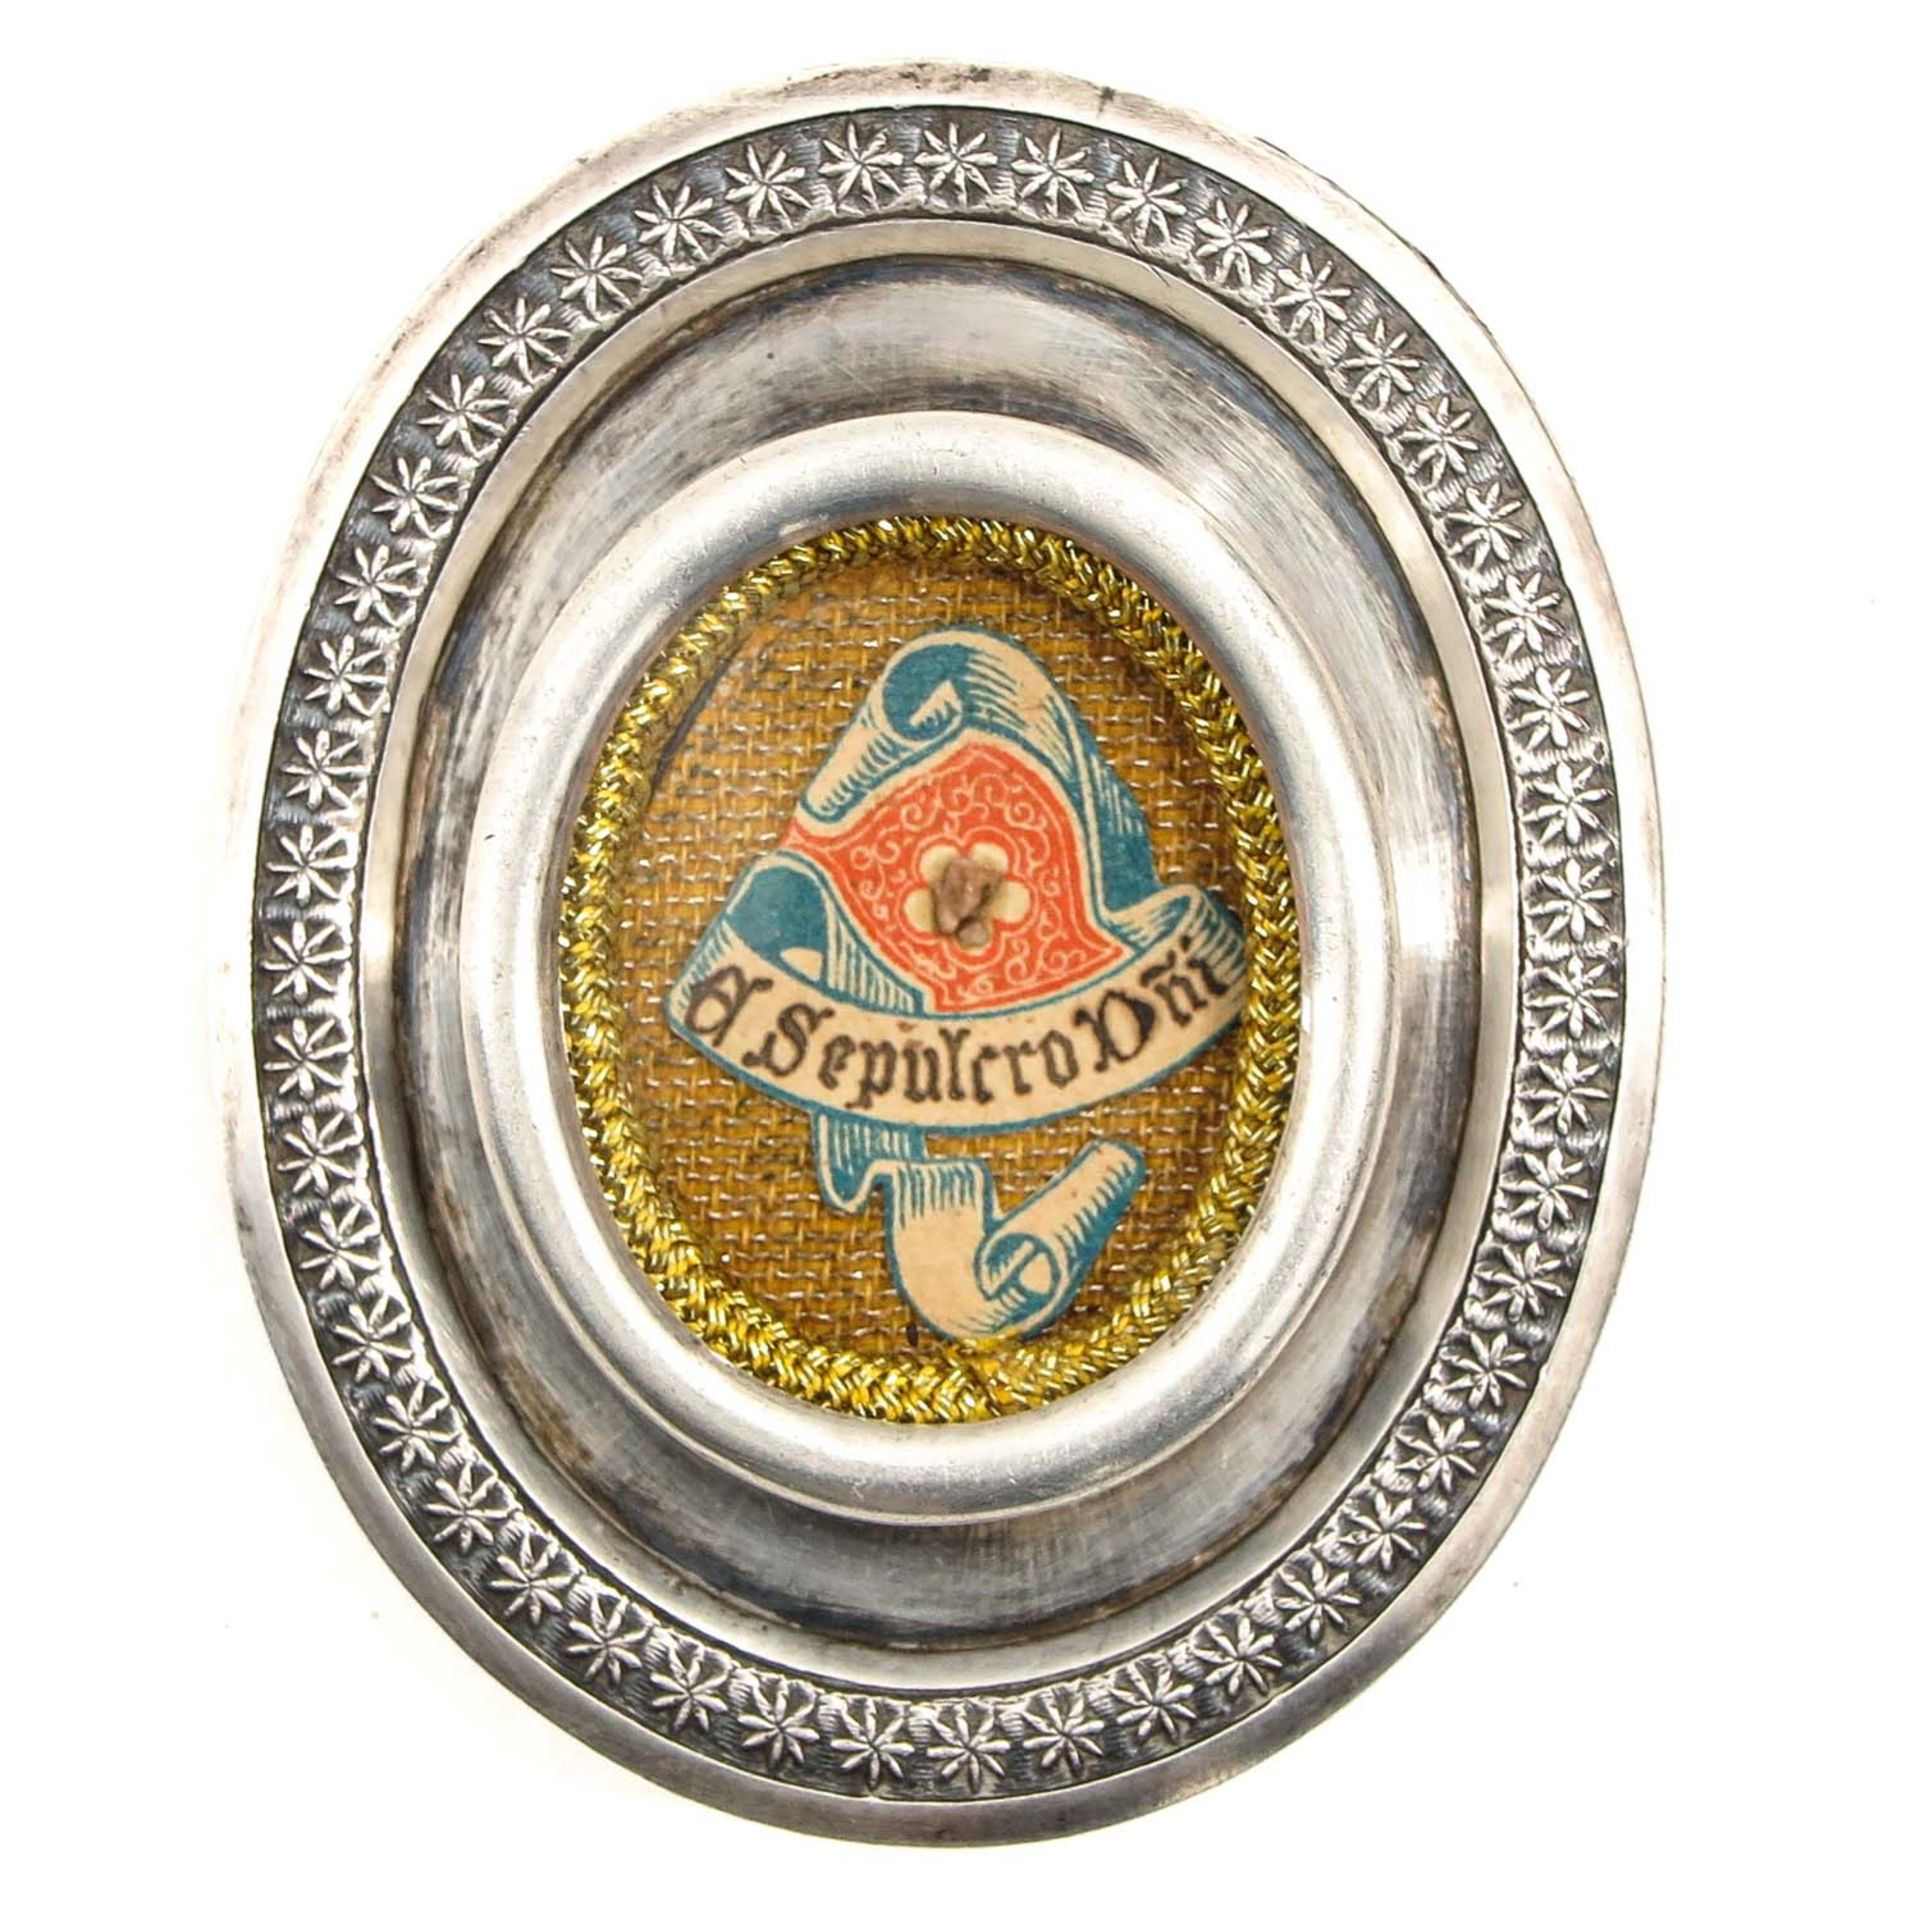 A Silver Relic Holder